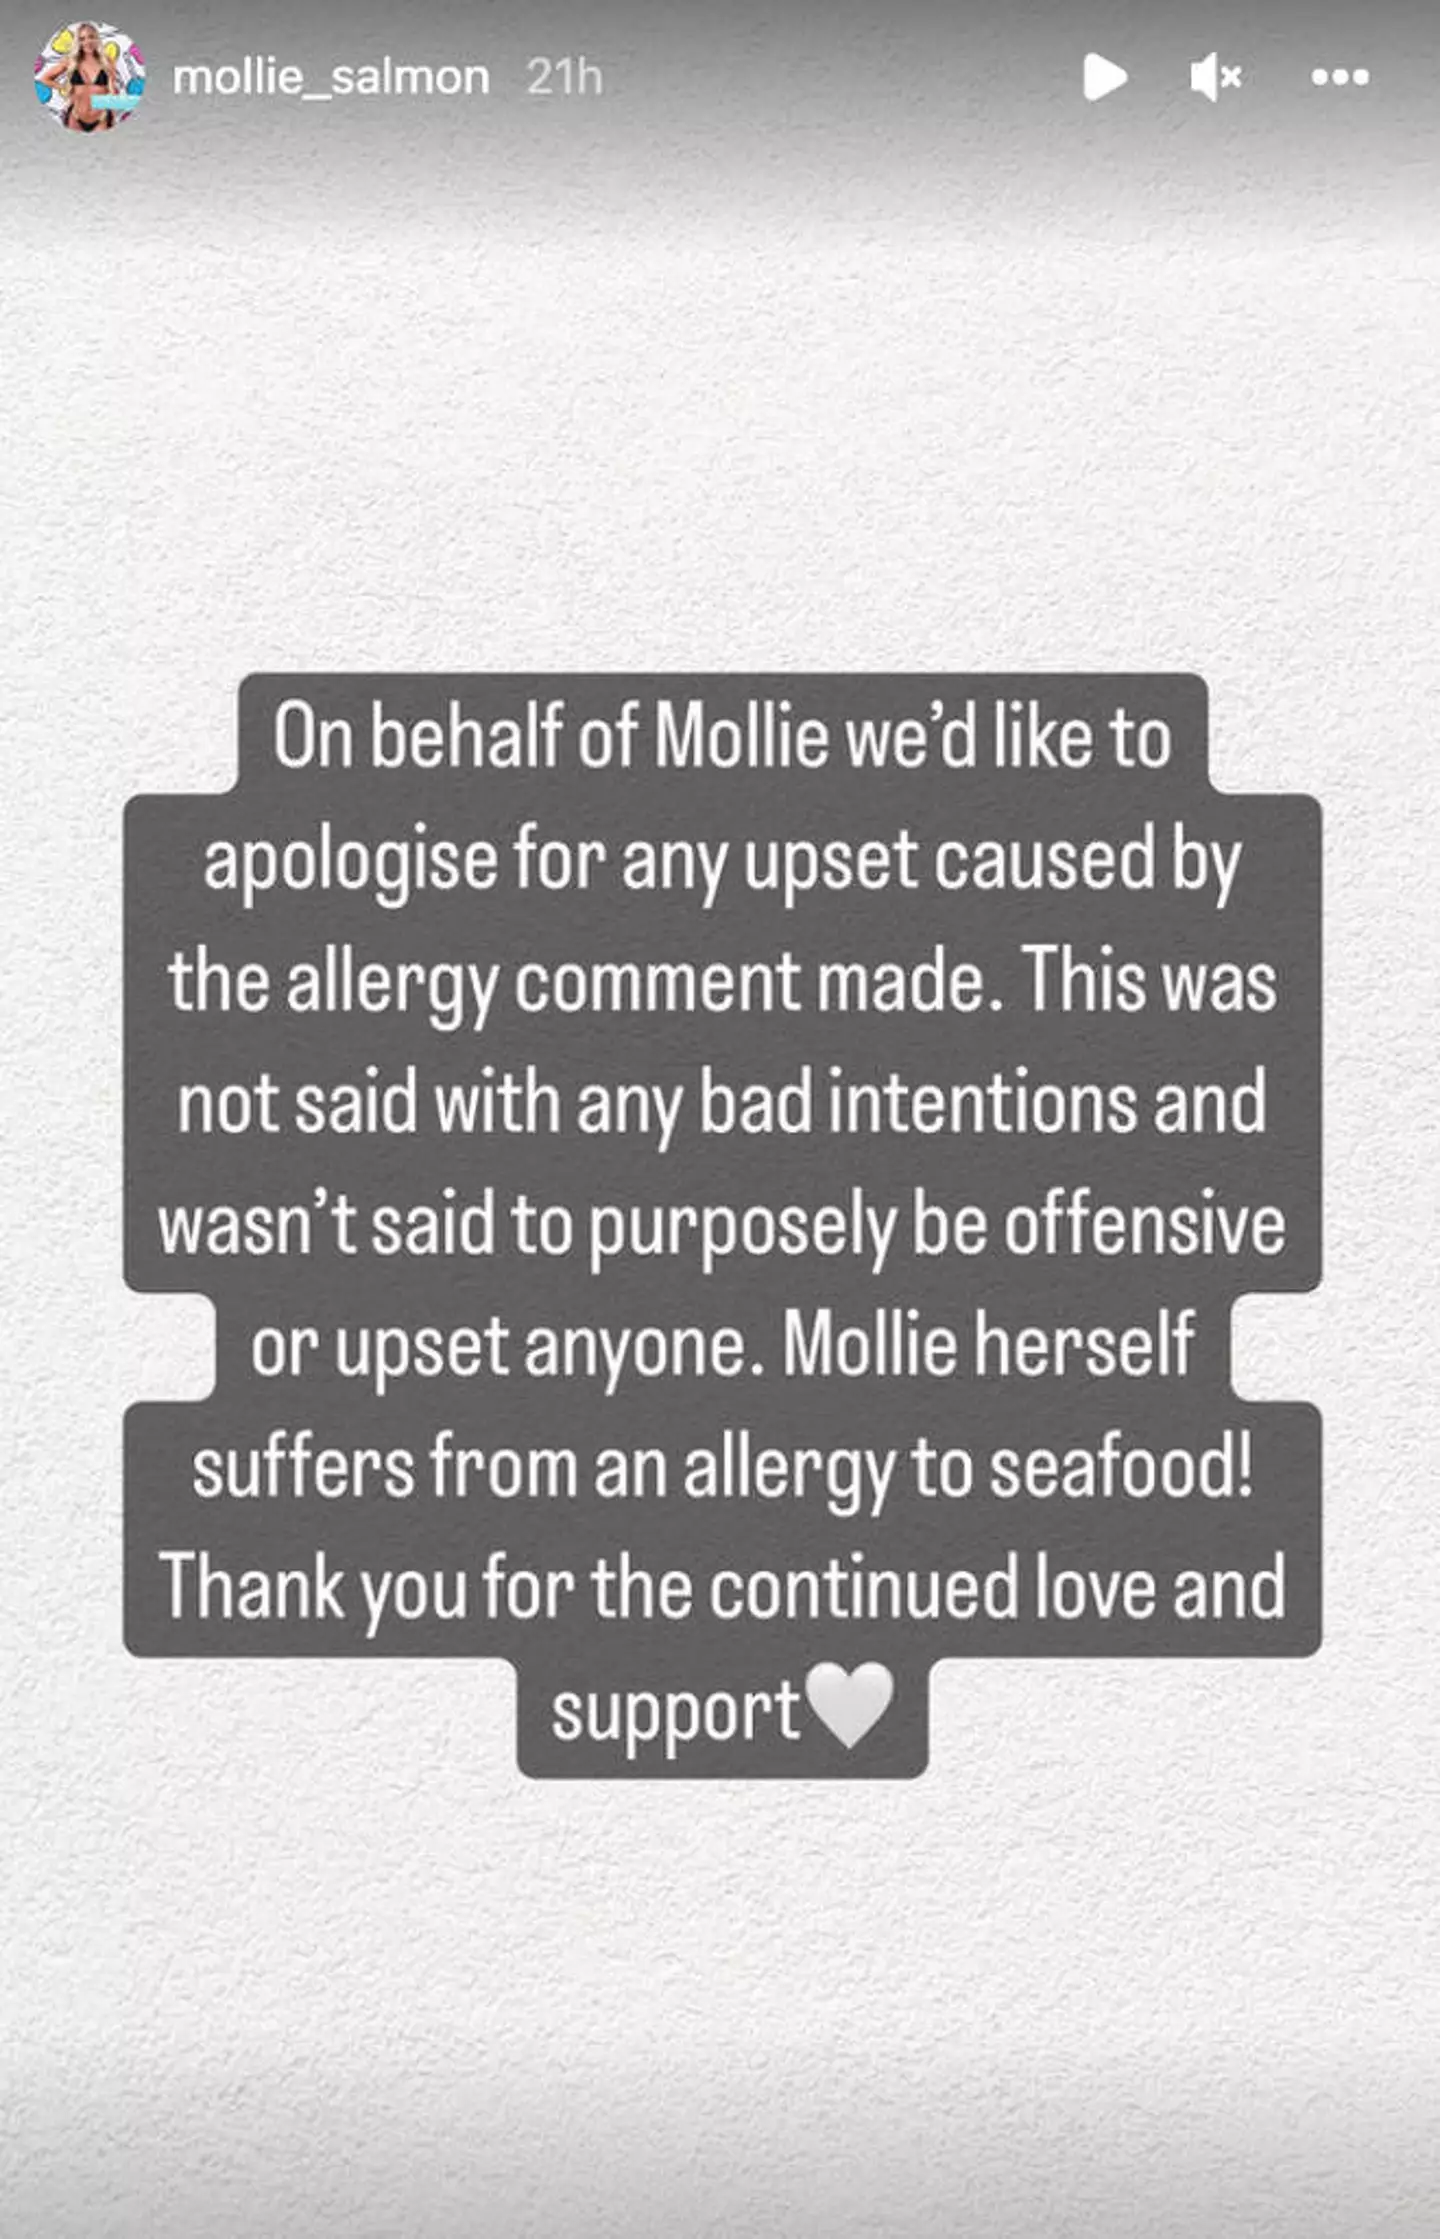 Molly Salmon's family released a statement.